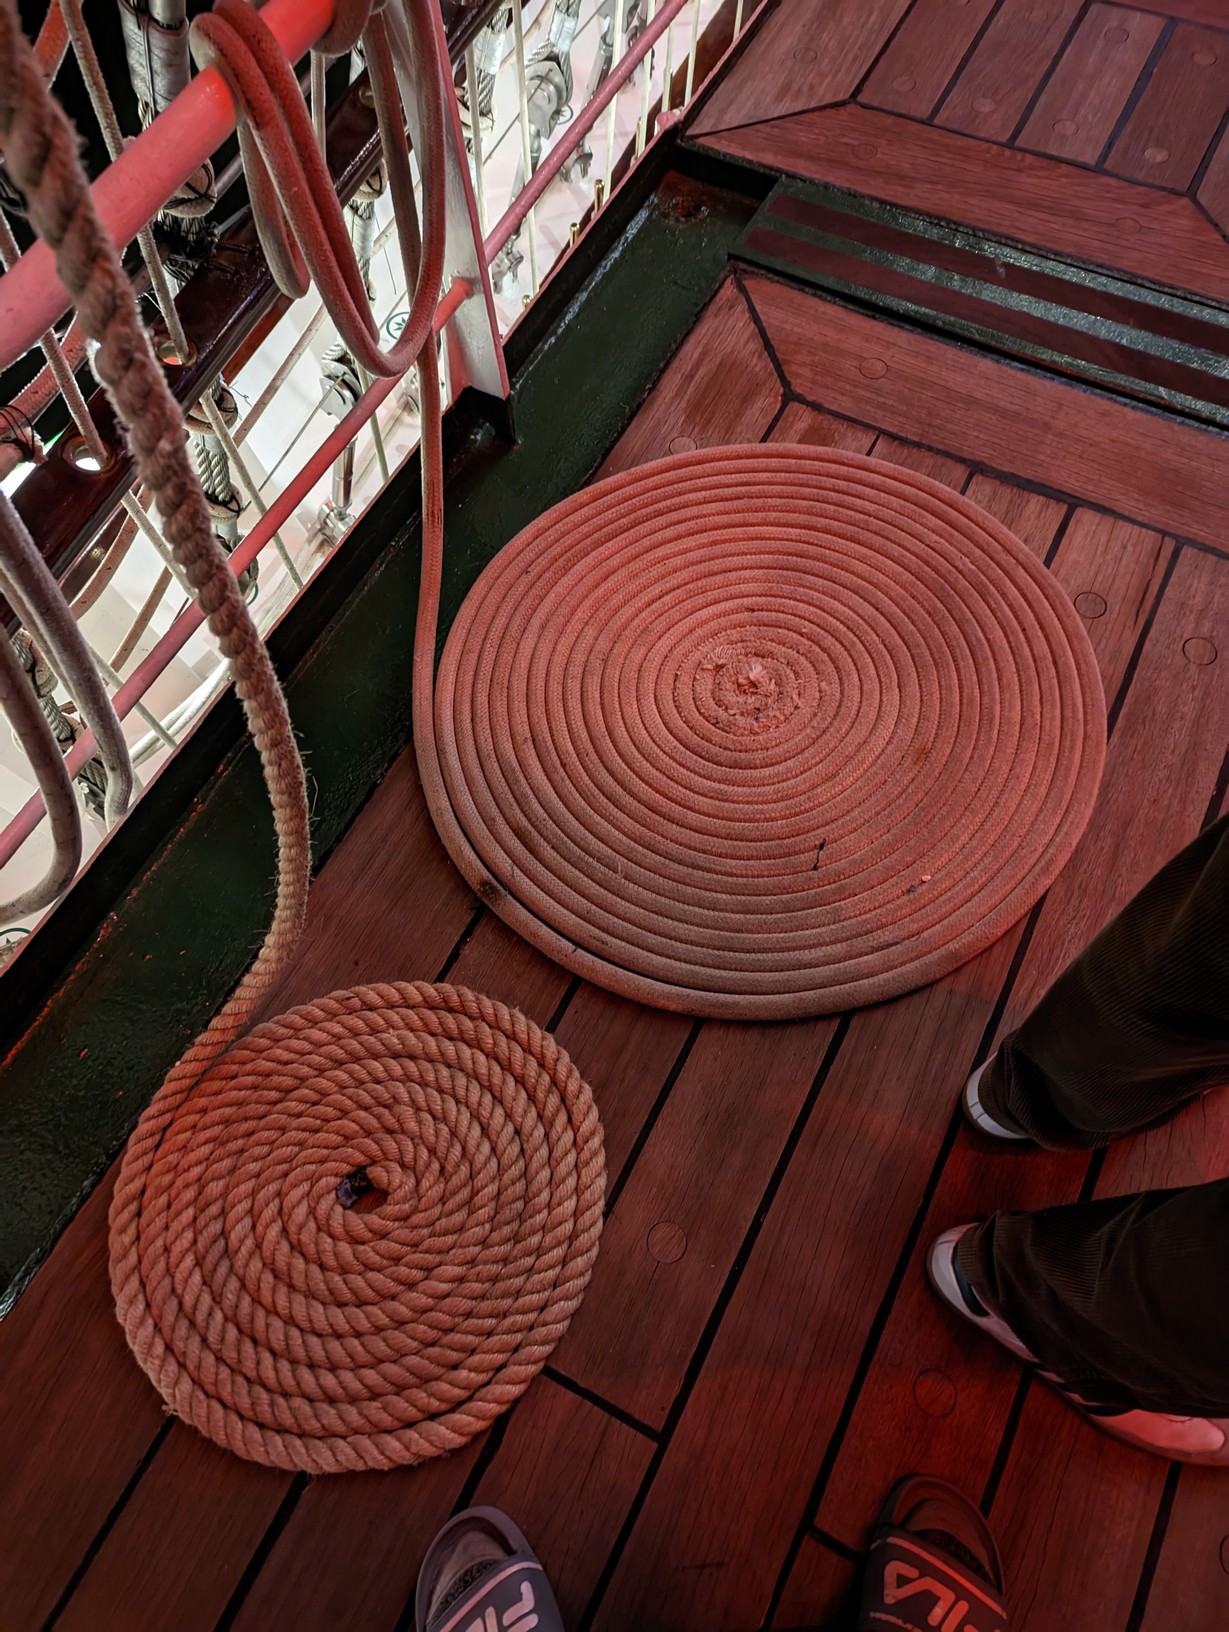 Two flat coils of rope.